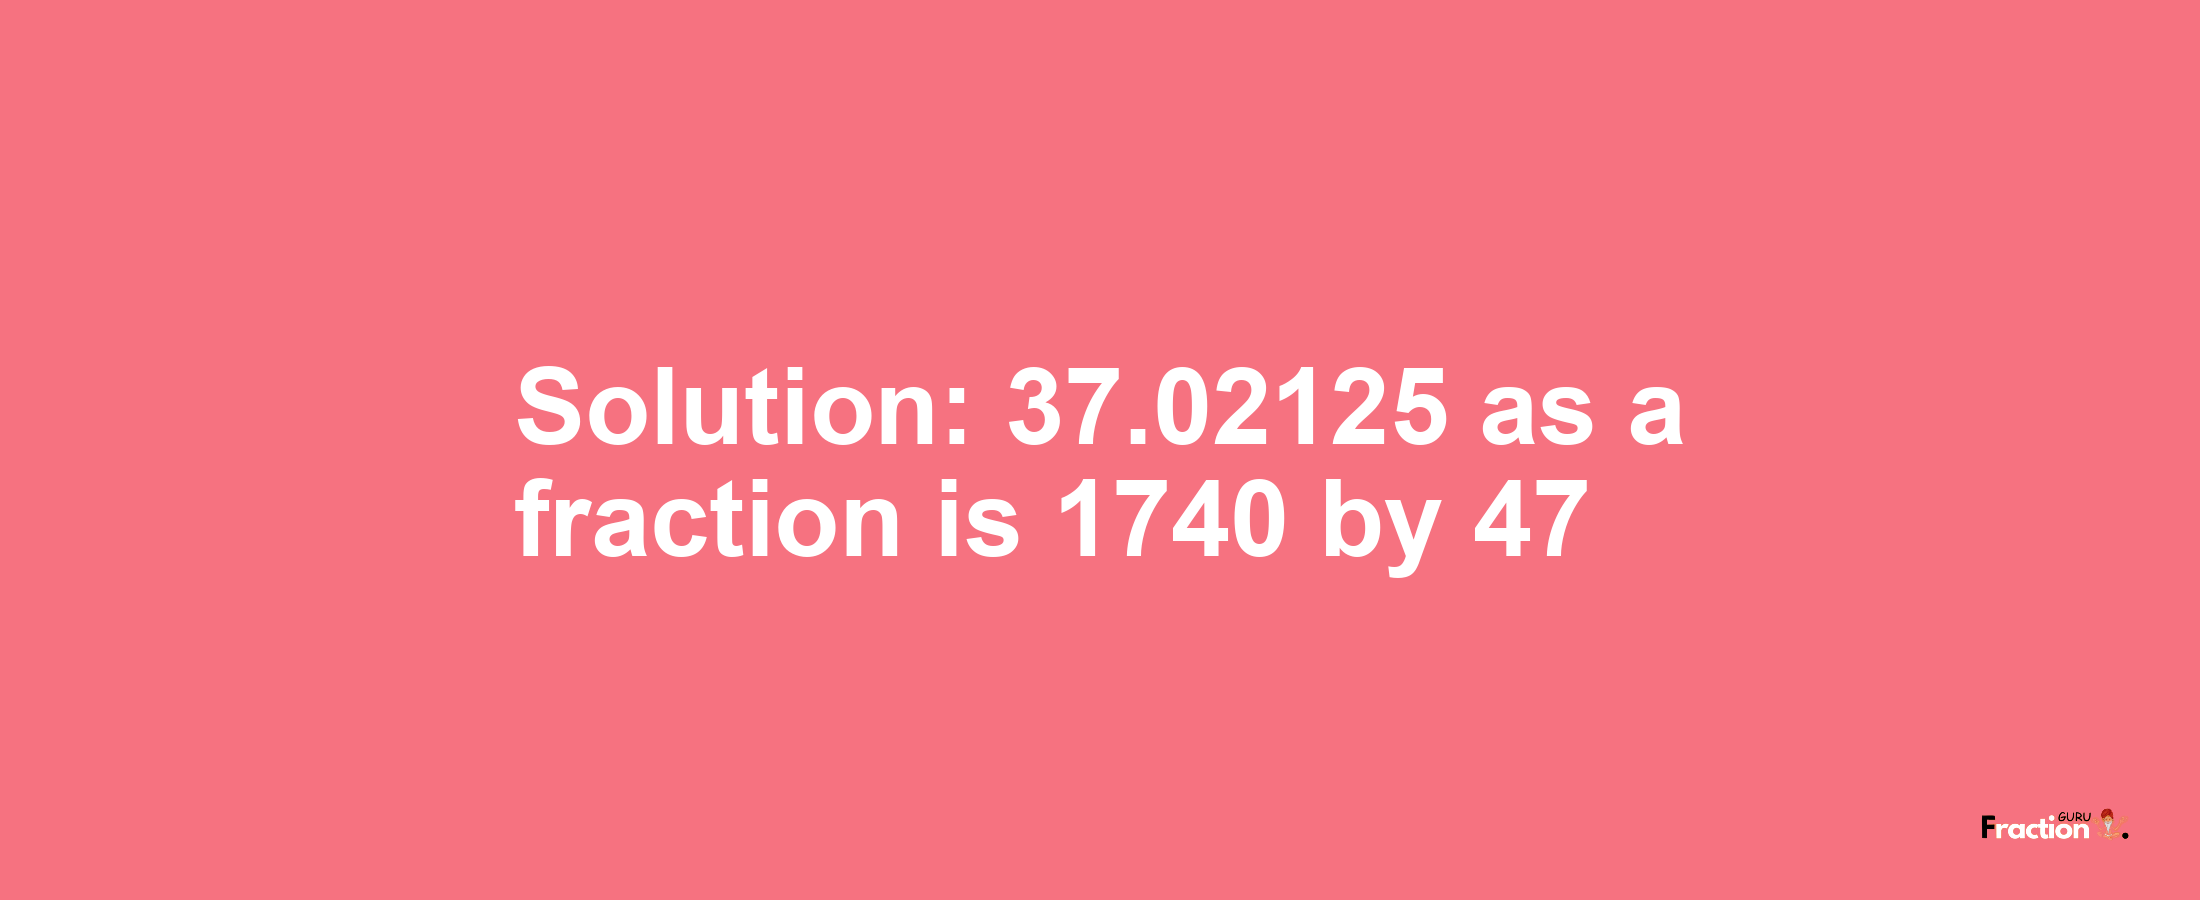 Solution:37.02125 as a fraction is 1740/47